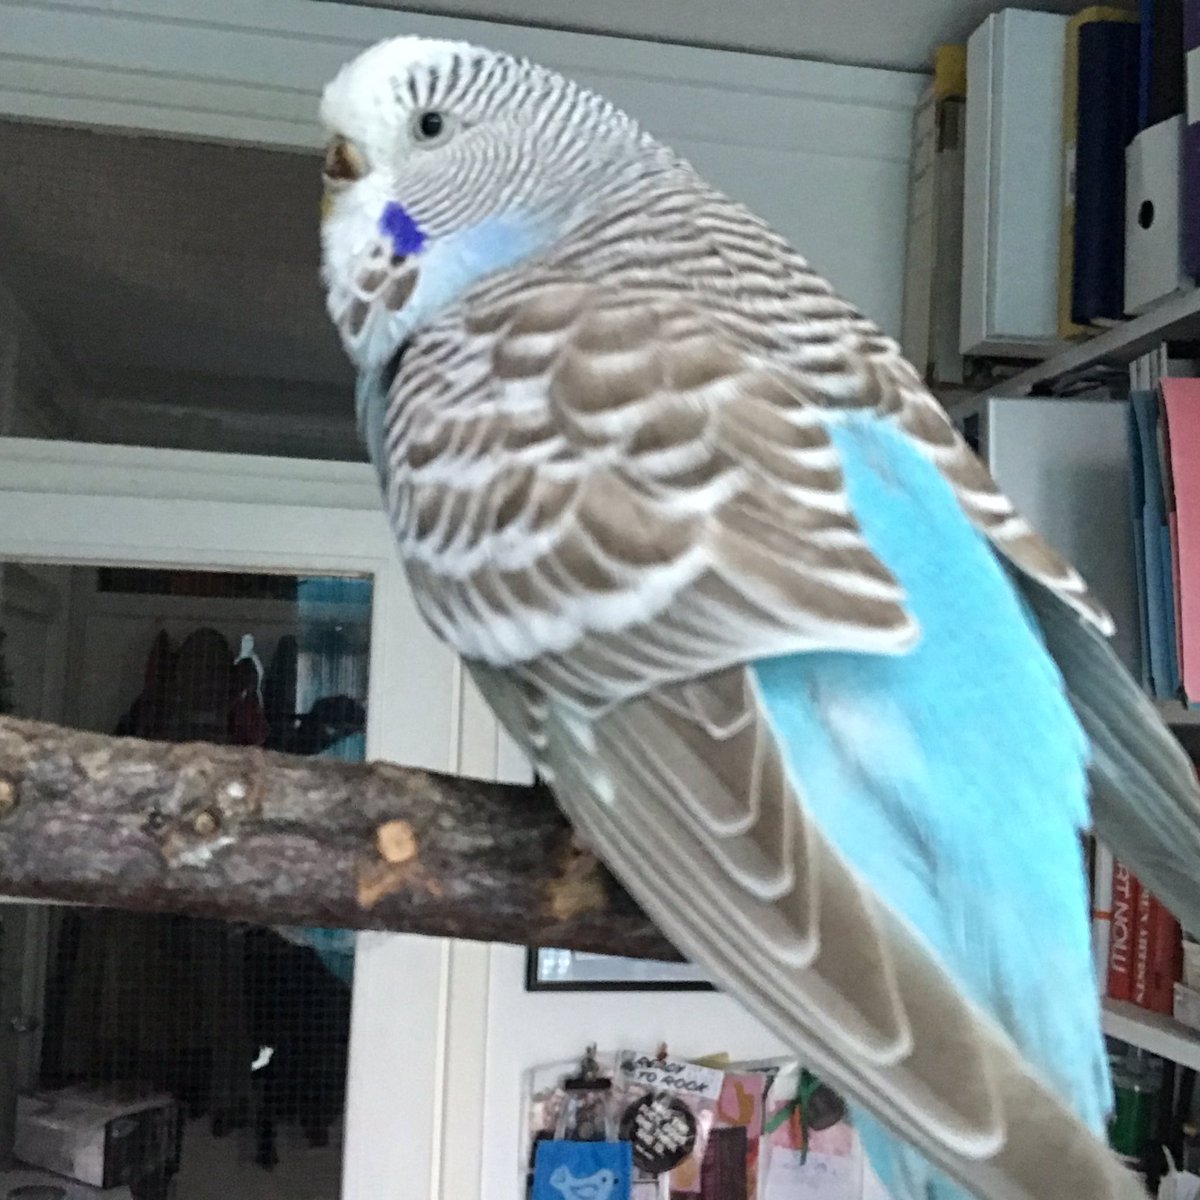 Our lovely budgie was upset this morning, a couple of hours of listening to @BBCRadio3 #NightTracks really calmed her.